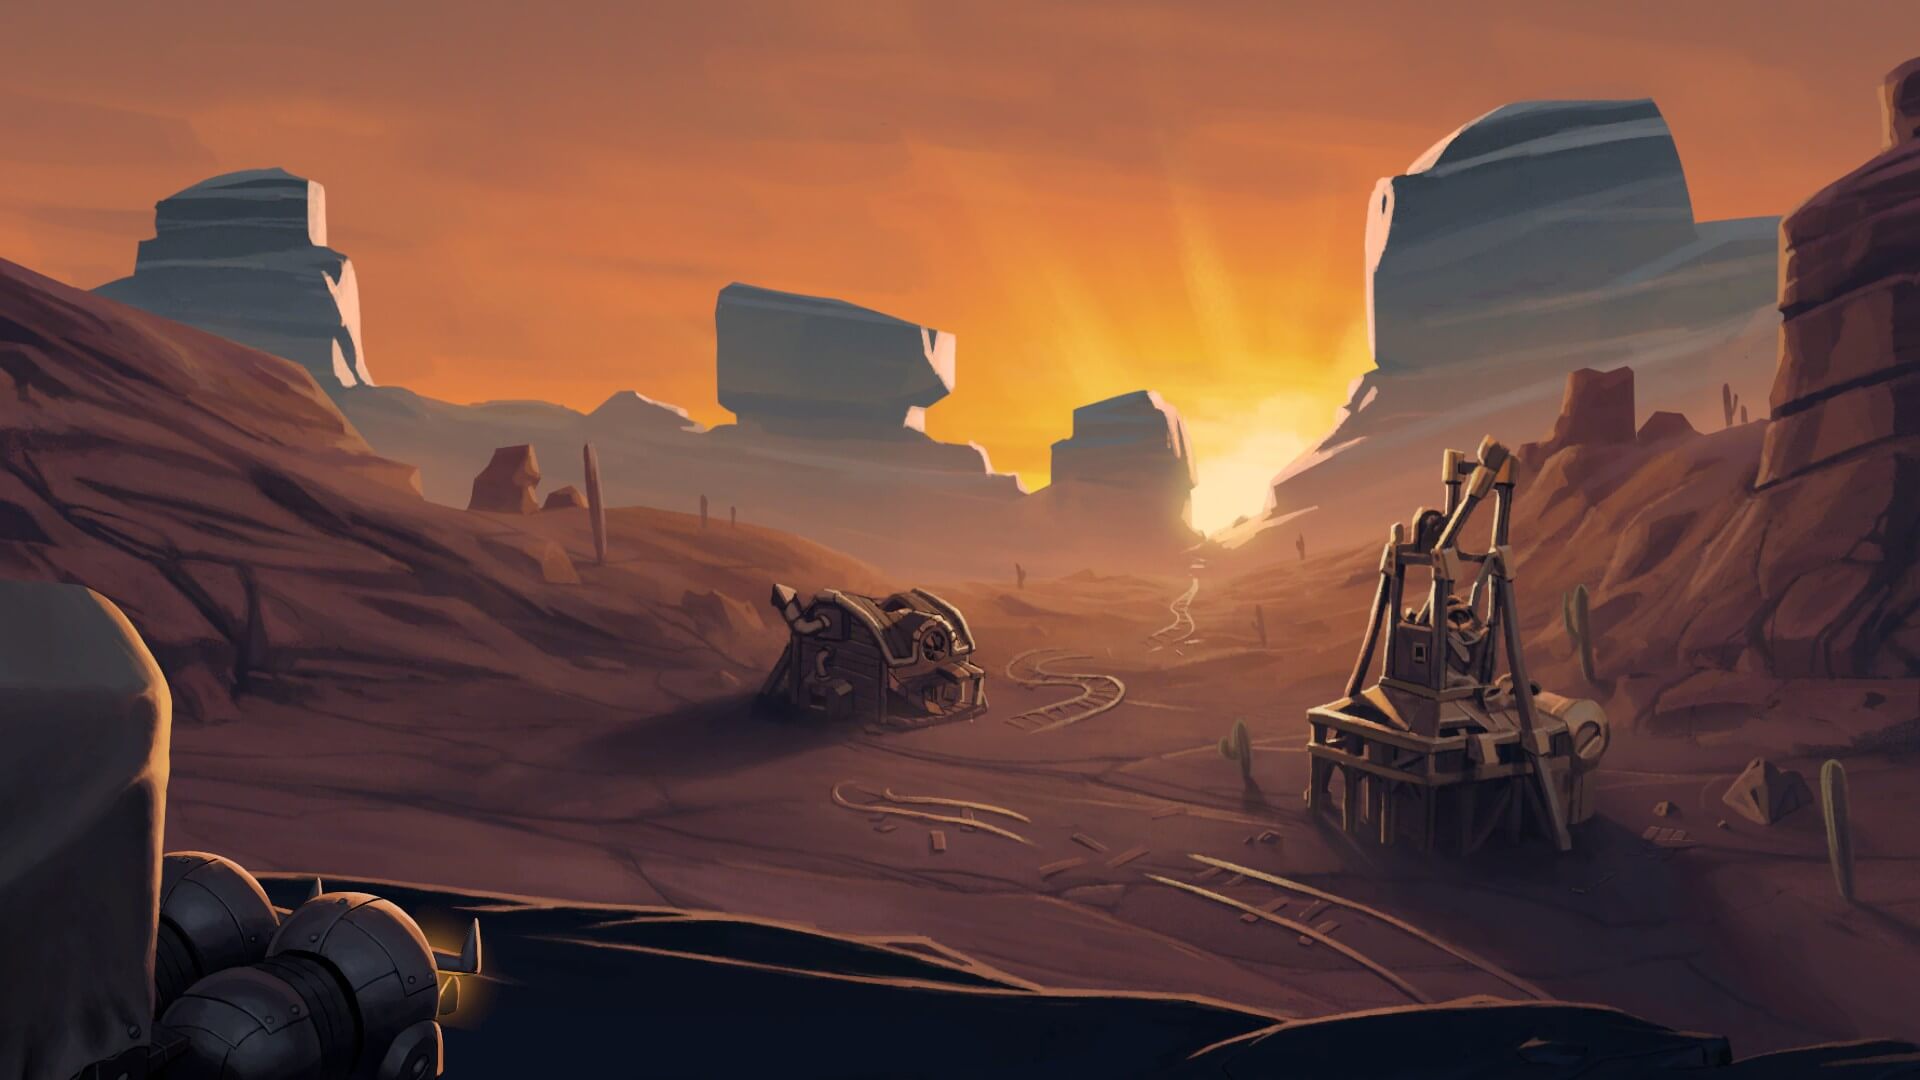 A shot from the opening cinematic. There are large cliffs in the distance with the sun peering out from between the furthest and closest. the environment is a barren waste with various wrecks and ruins scattered around. One of the main structures seemed to be an oil rig.